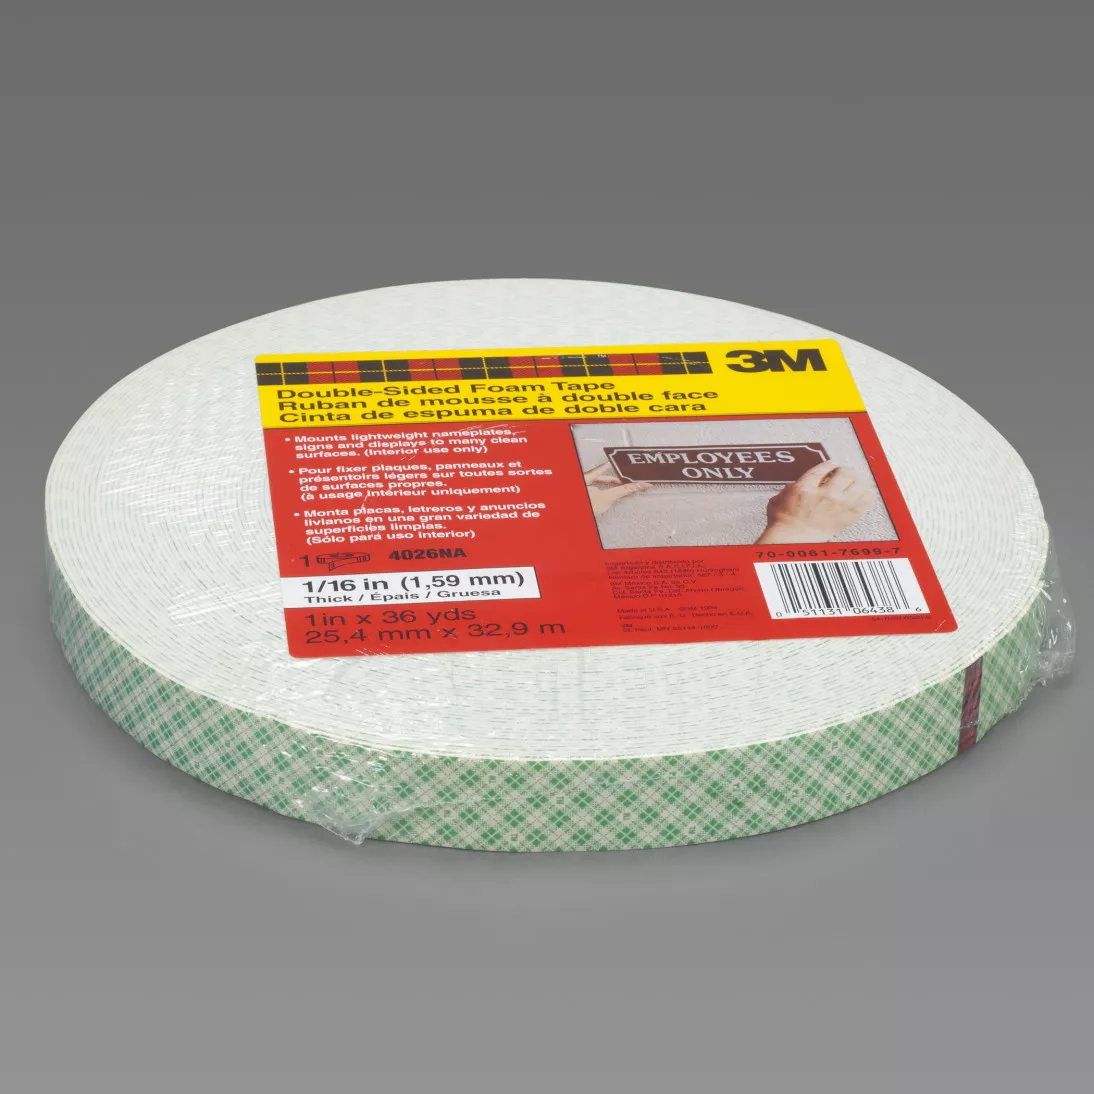 3M™ Double Coated Urethane Foam Tape 4026, Natural, 4 in x 36 yd, 62
mil, 2 rolls per case